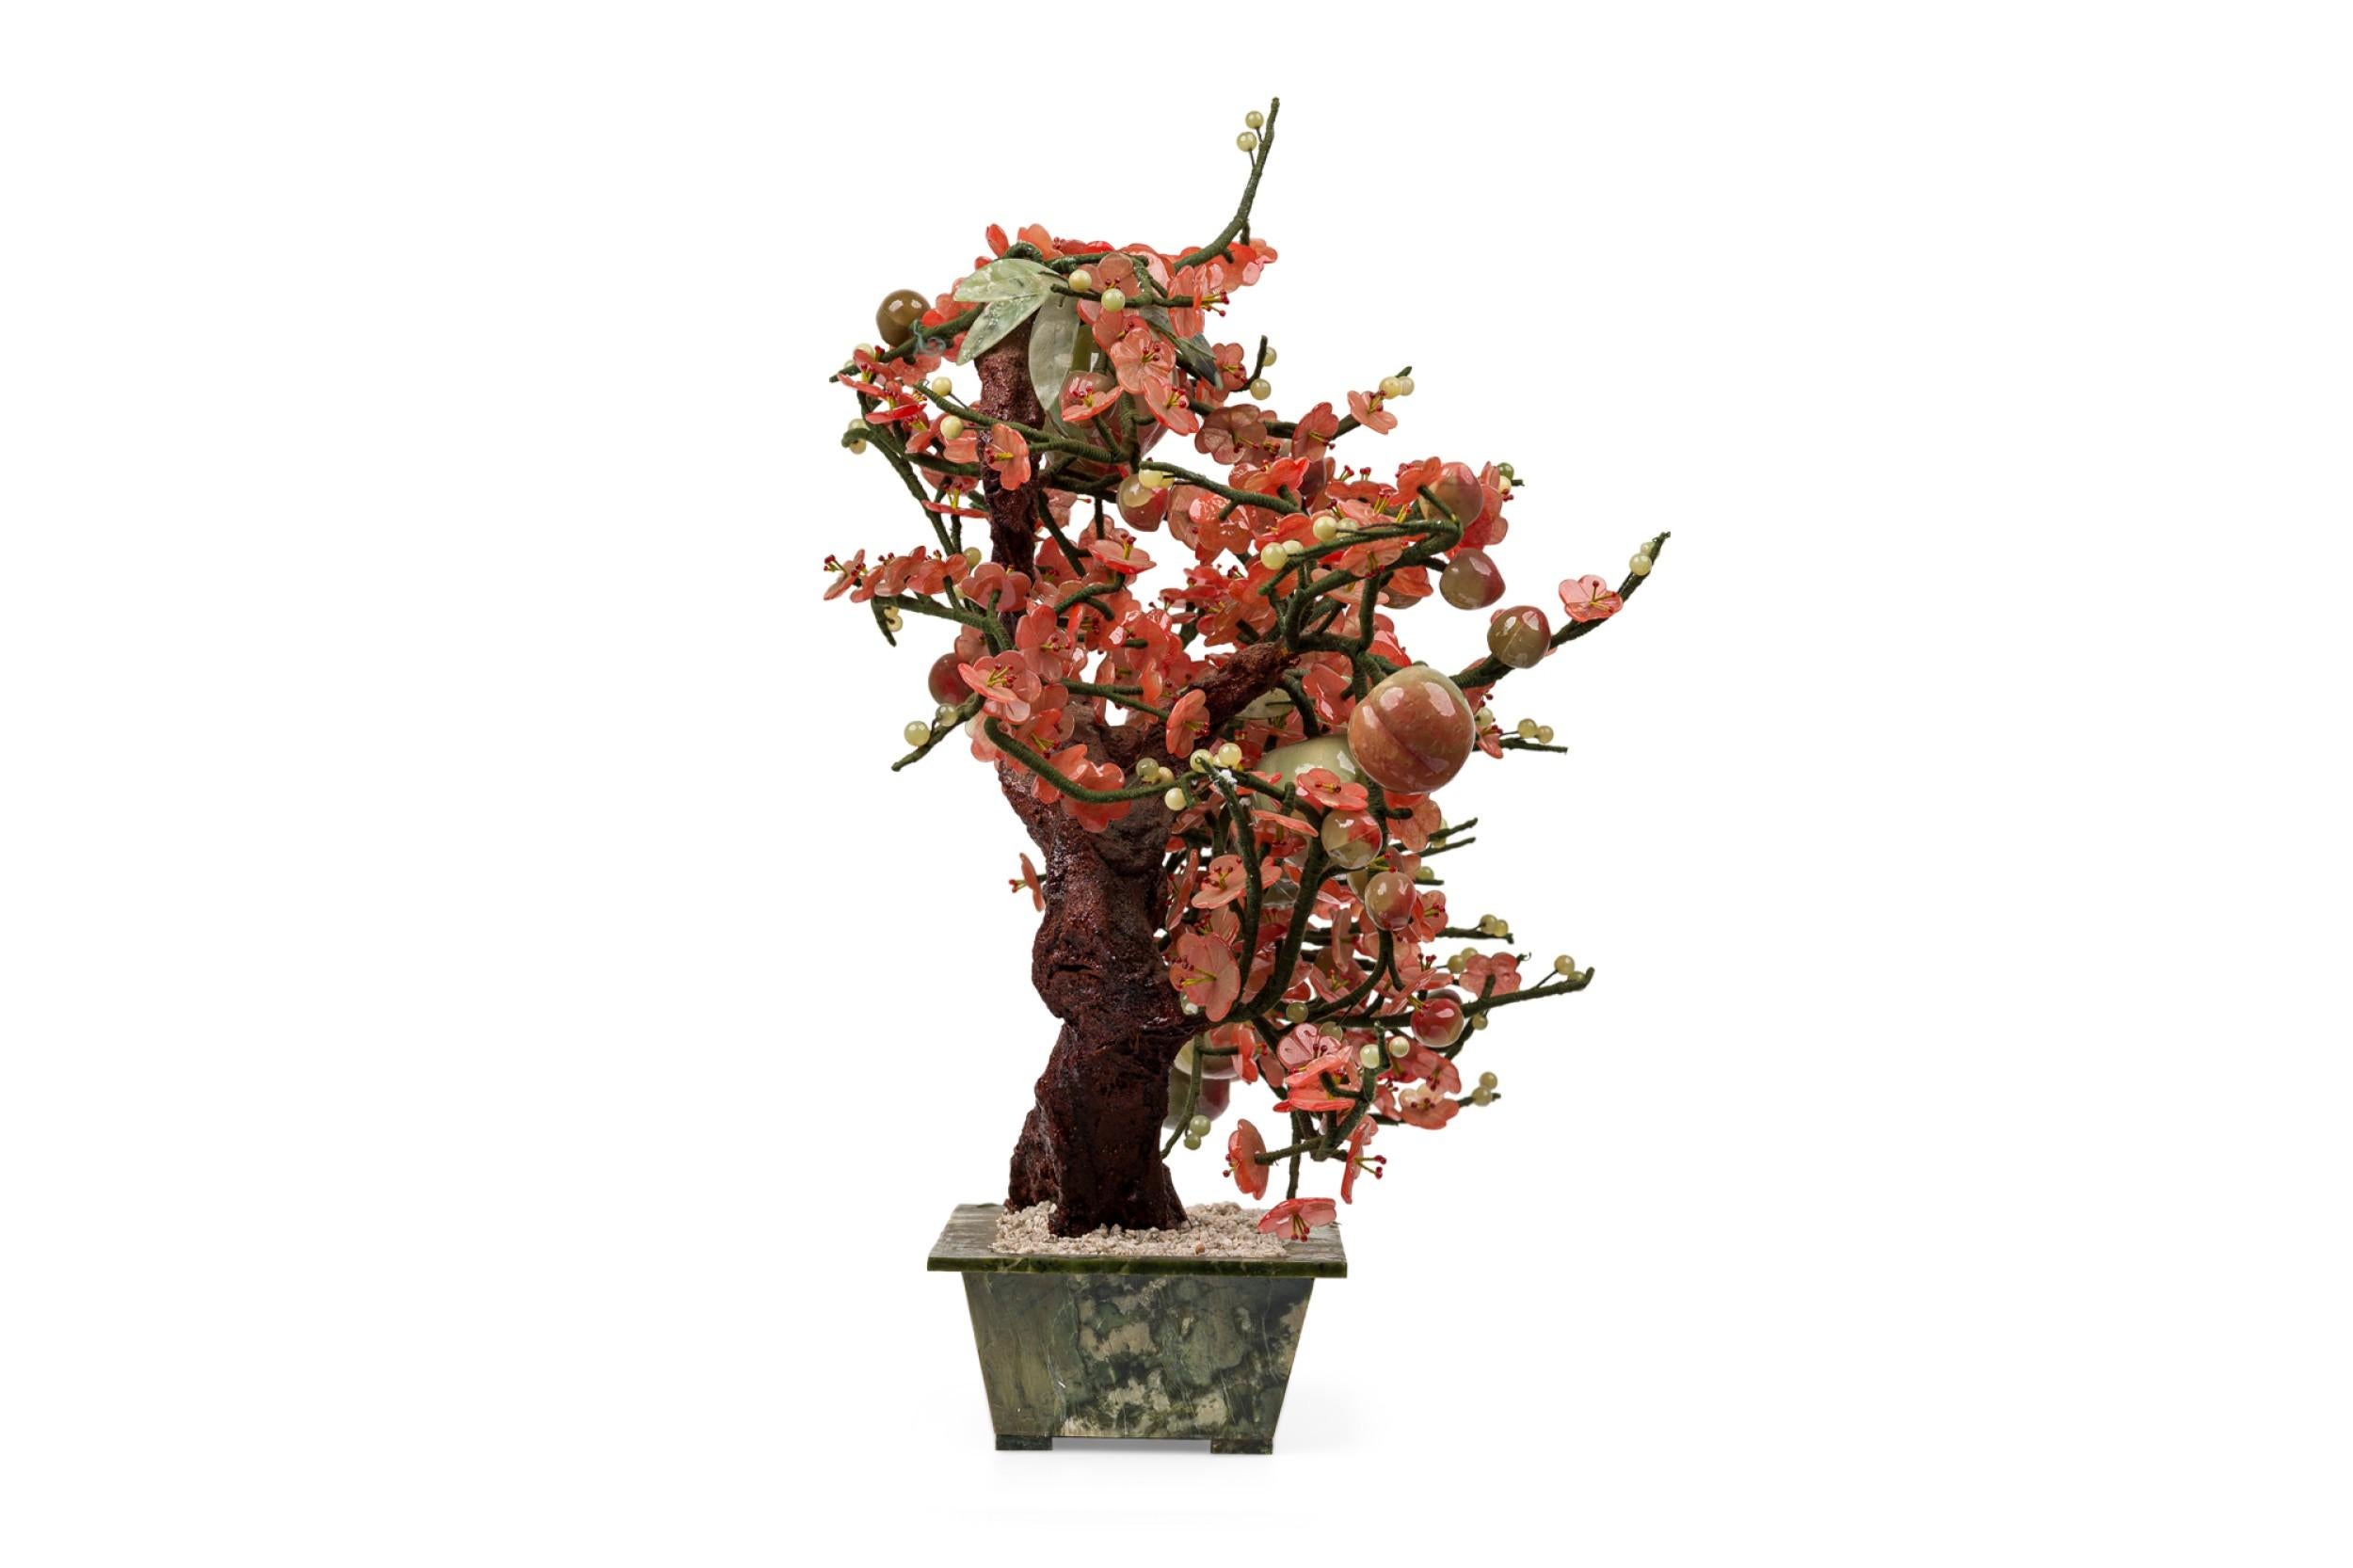 Chinese Glass Cherry Blossom Sculpture Potted in a Green Planter For Sale 1